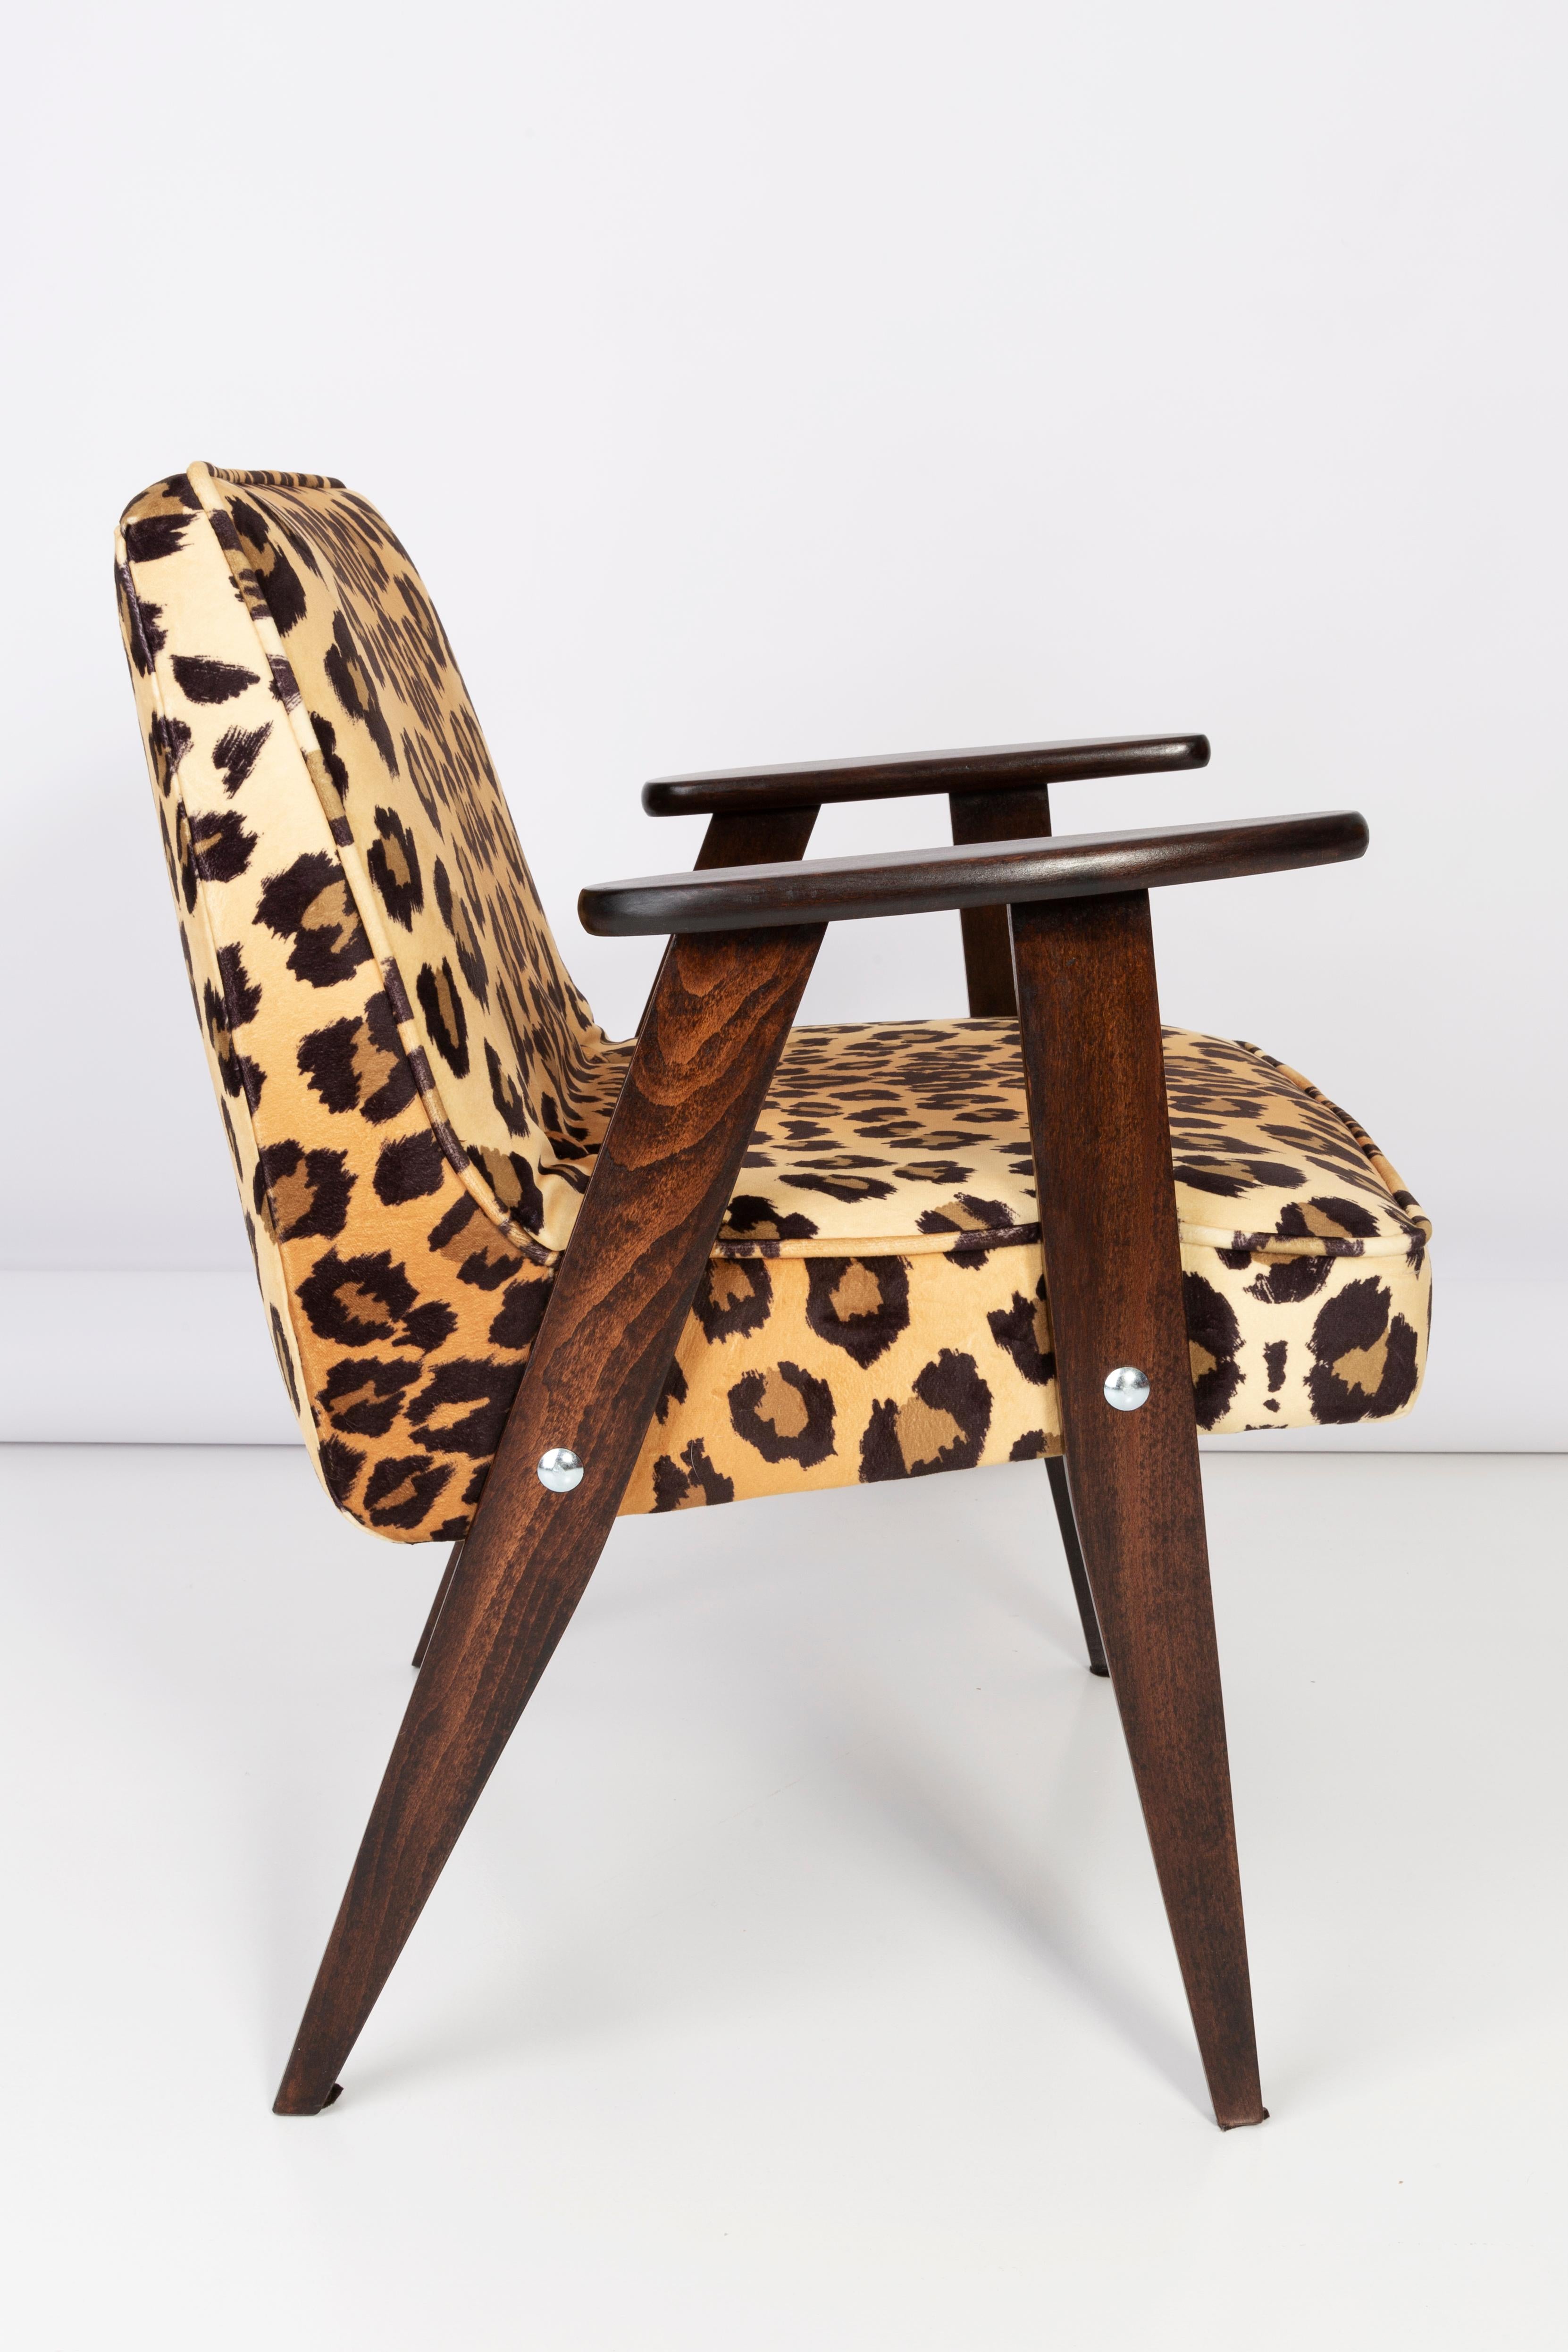 Polish Two Midcentury 366 Armchairs in Leopard Print Velvet, Jozef Chierowski, 1960s For Sale